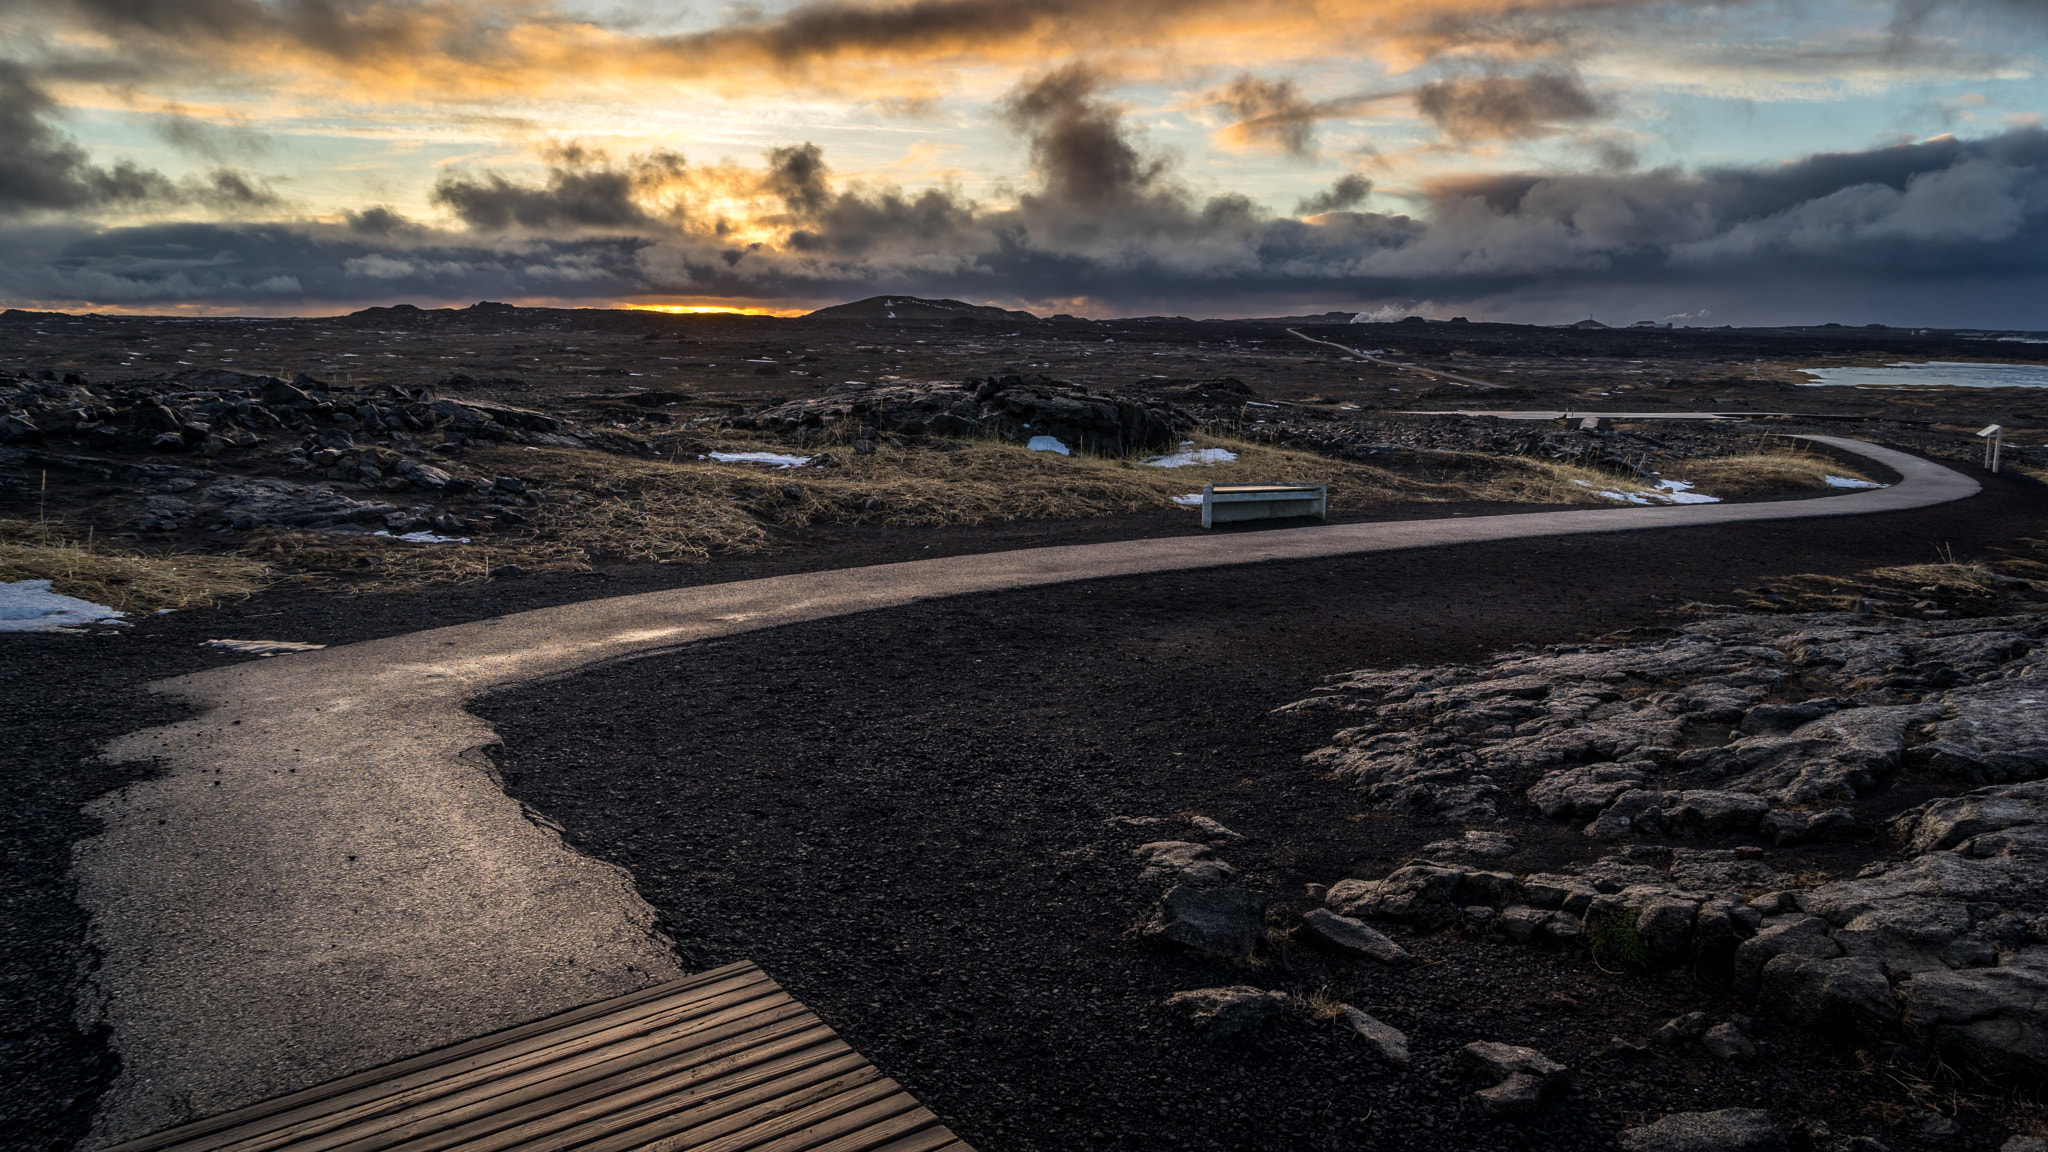 Sony a7 sample photo. Sunrise in the southern peninsula -  sandvik, iceland - travel photography photography